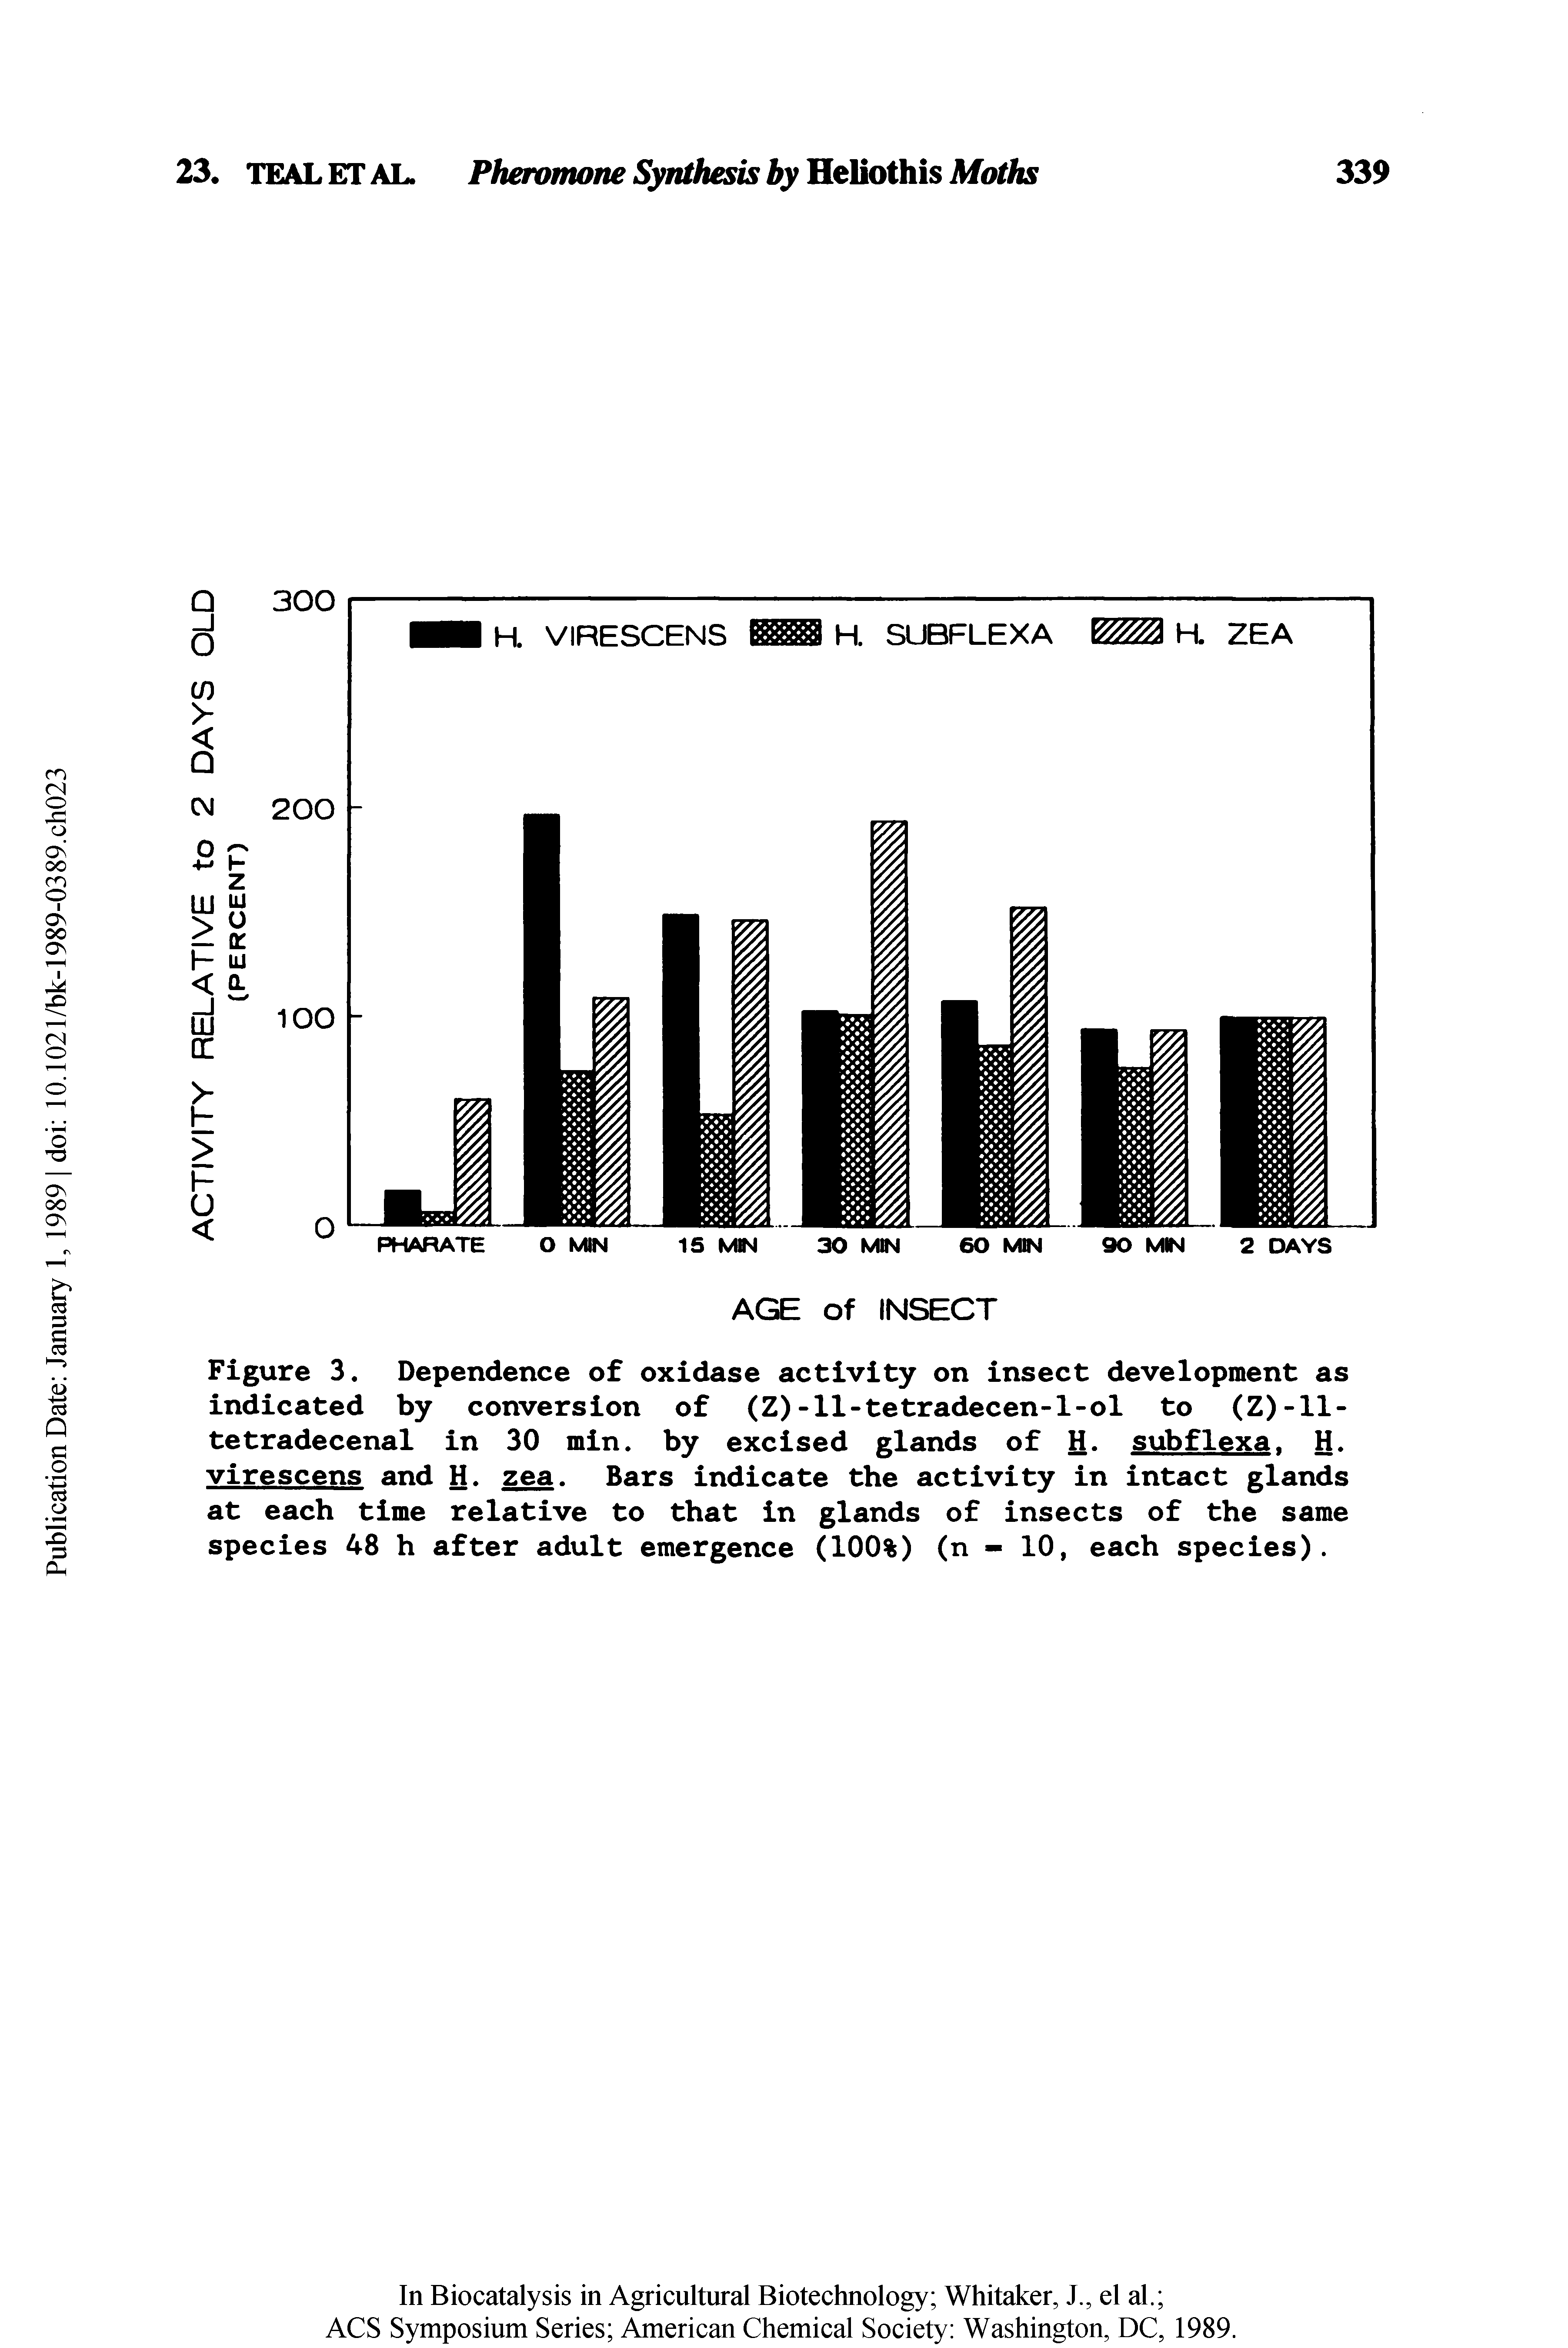 Figure 3. Dependence of oxidase activity on insect development as indicated by conversion of (Z)-11-tetradecen-l-ol to (Z)-ll-tetradecenal in 30 min. by excised glands of H. subflexa. H. yirescens and H. zea. Bars indicate the activity in intact glands at each time relative to that in glands of insects of the same species 48 h after adult emergence (100%) (n - 10, each species).